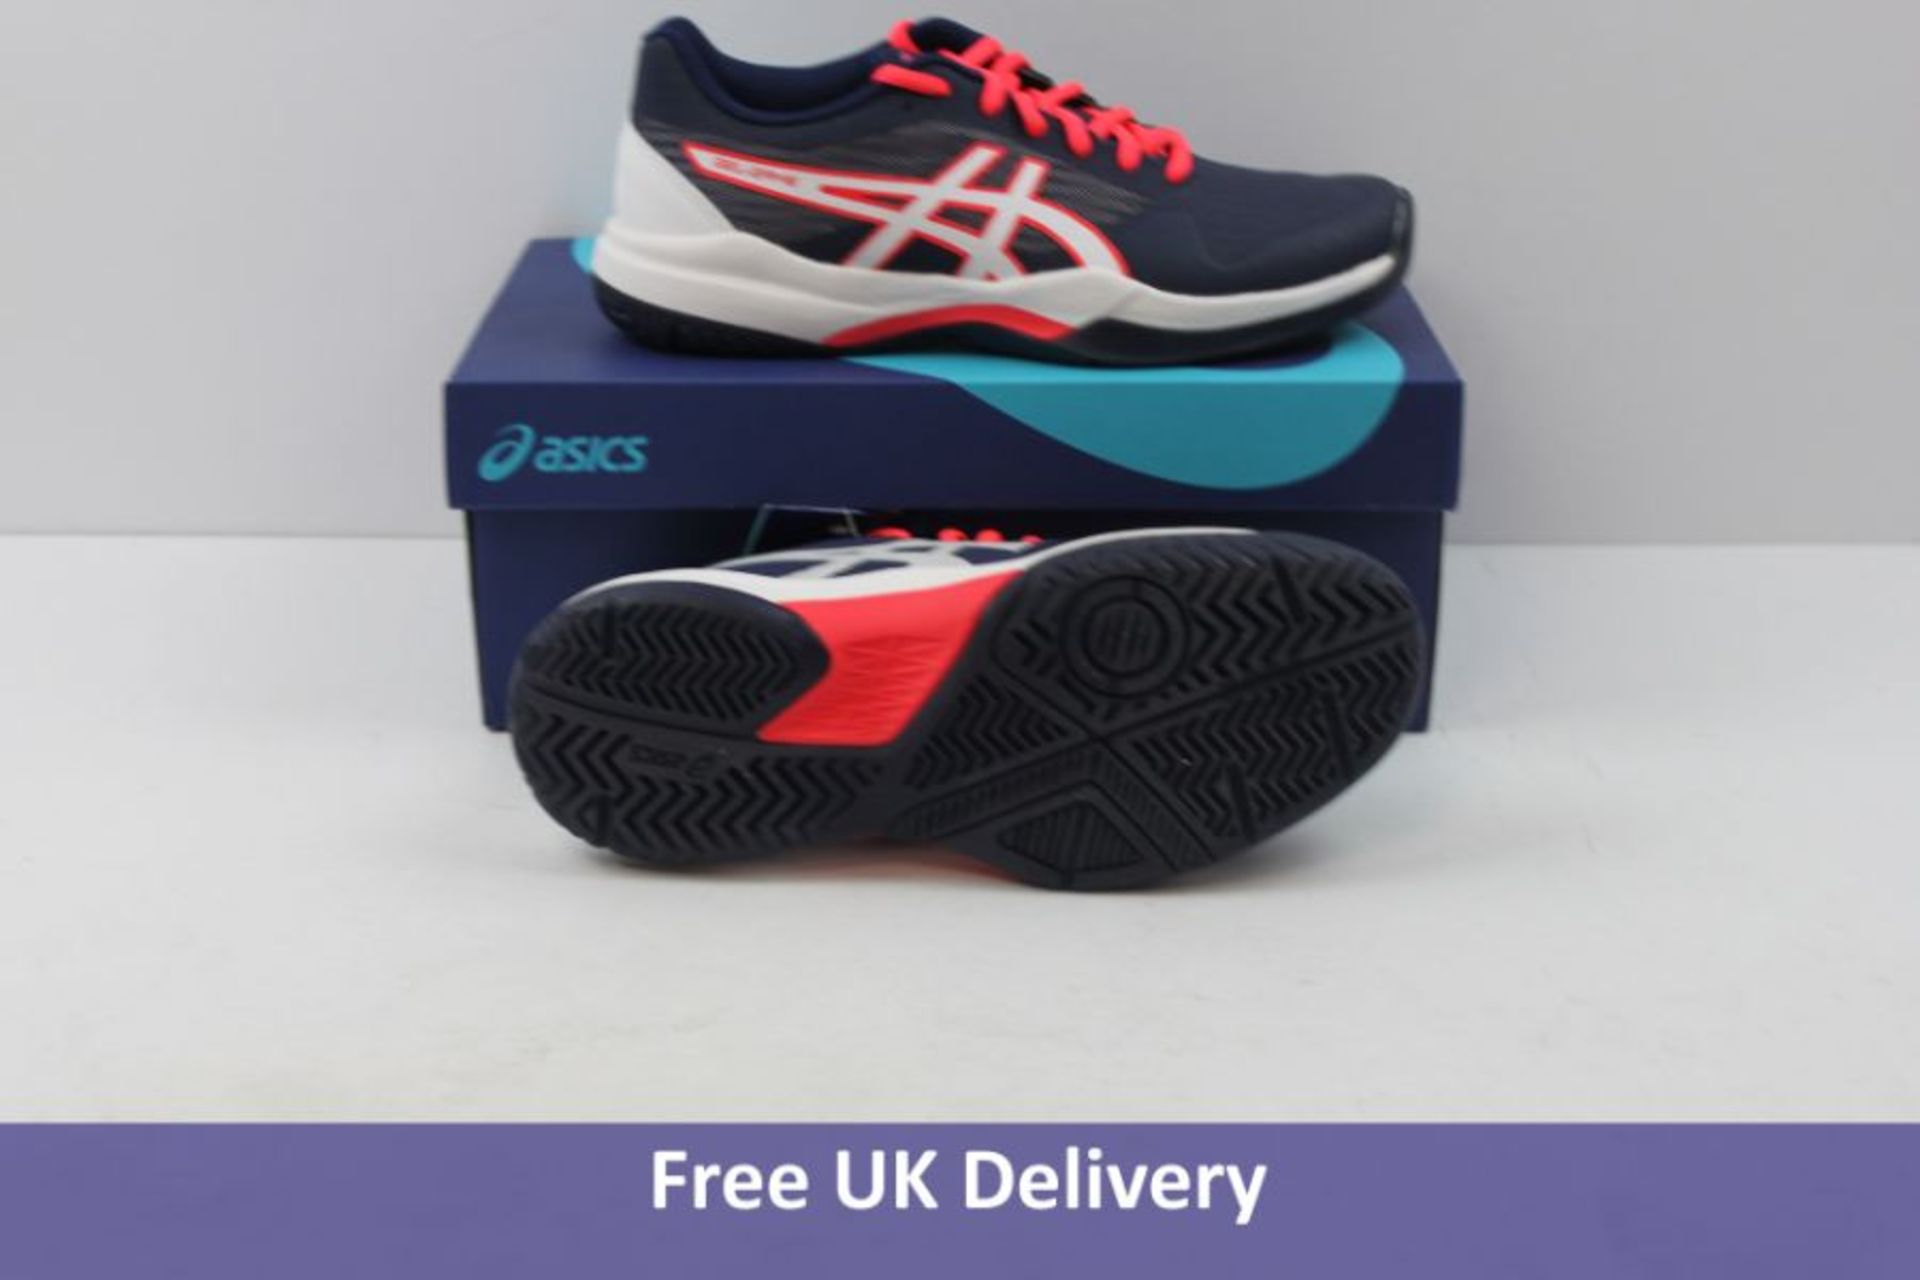 Asics Women's Gel-Game 7 Trainers, Navy and Pink, UK 5